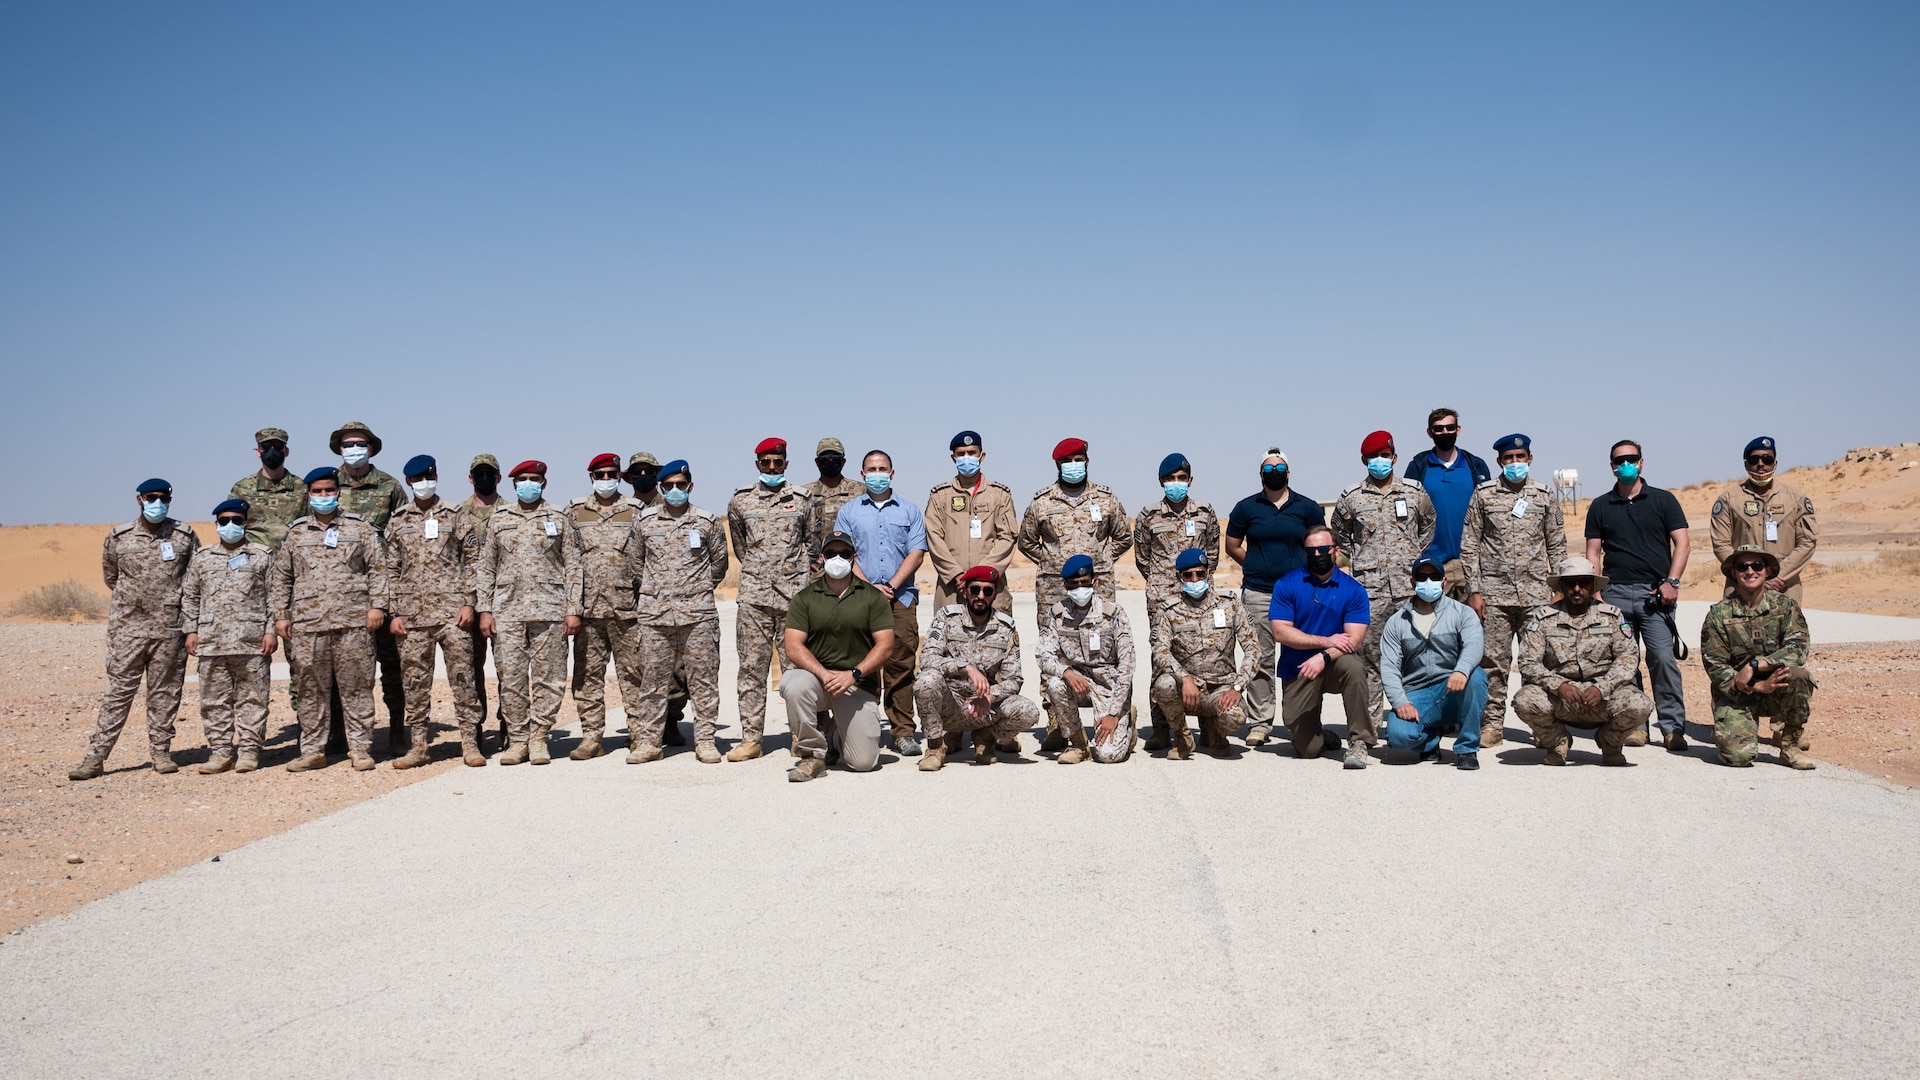 Service members from the Royal Saudi Air Force and the U.S. Air Force pose for a photo after a bilateral training exercise at Prince Sultan Air Base, Kingdom of Saudi Arabia, Feb. 10, 2022. The bilateral exercise consisted of U.S. personnel from the explosive ordnance disposal team and the Office of Special Investigation training alongside RSAF EOD and Intelligence and Security Wing personnel. (U.S. Air Force photo by Senior Airman Jacob B. Wrightsman)